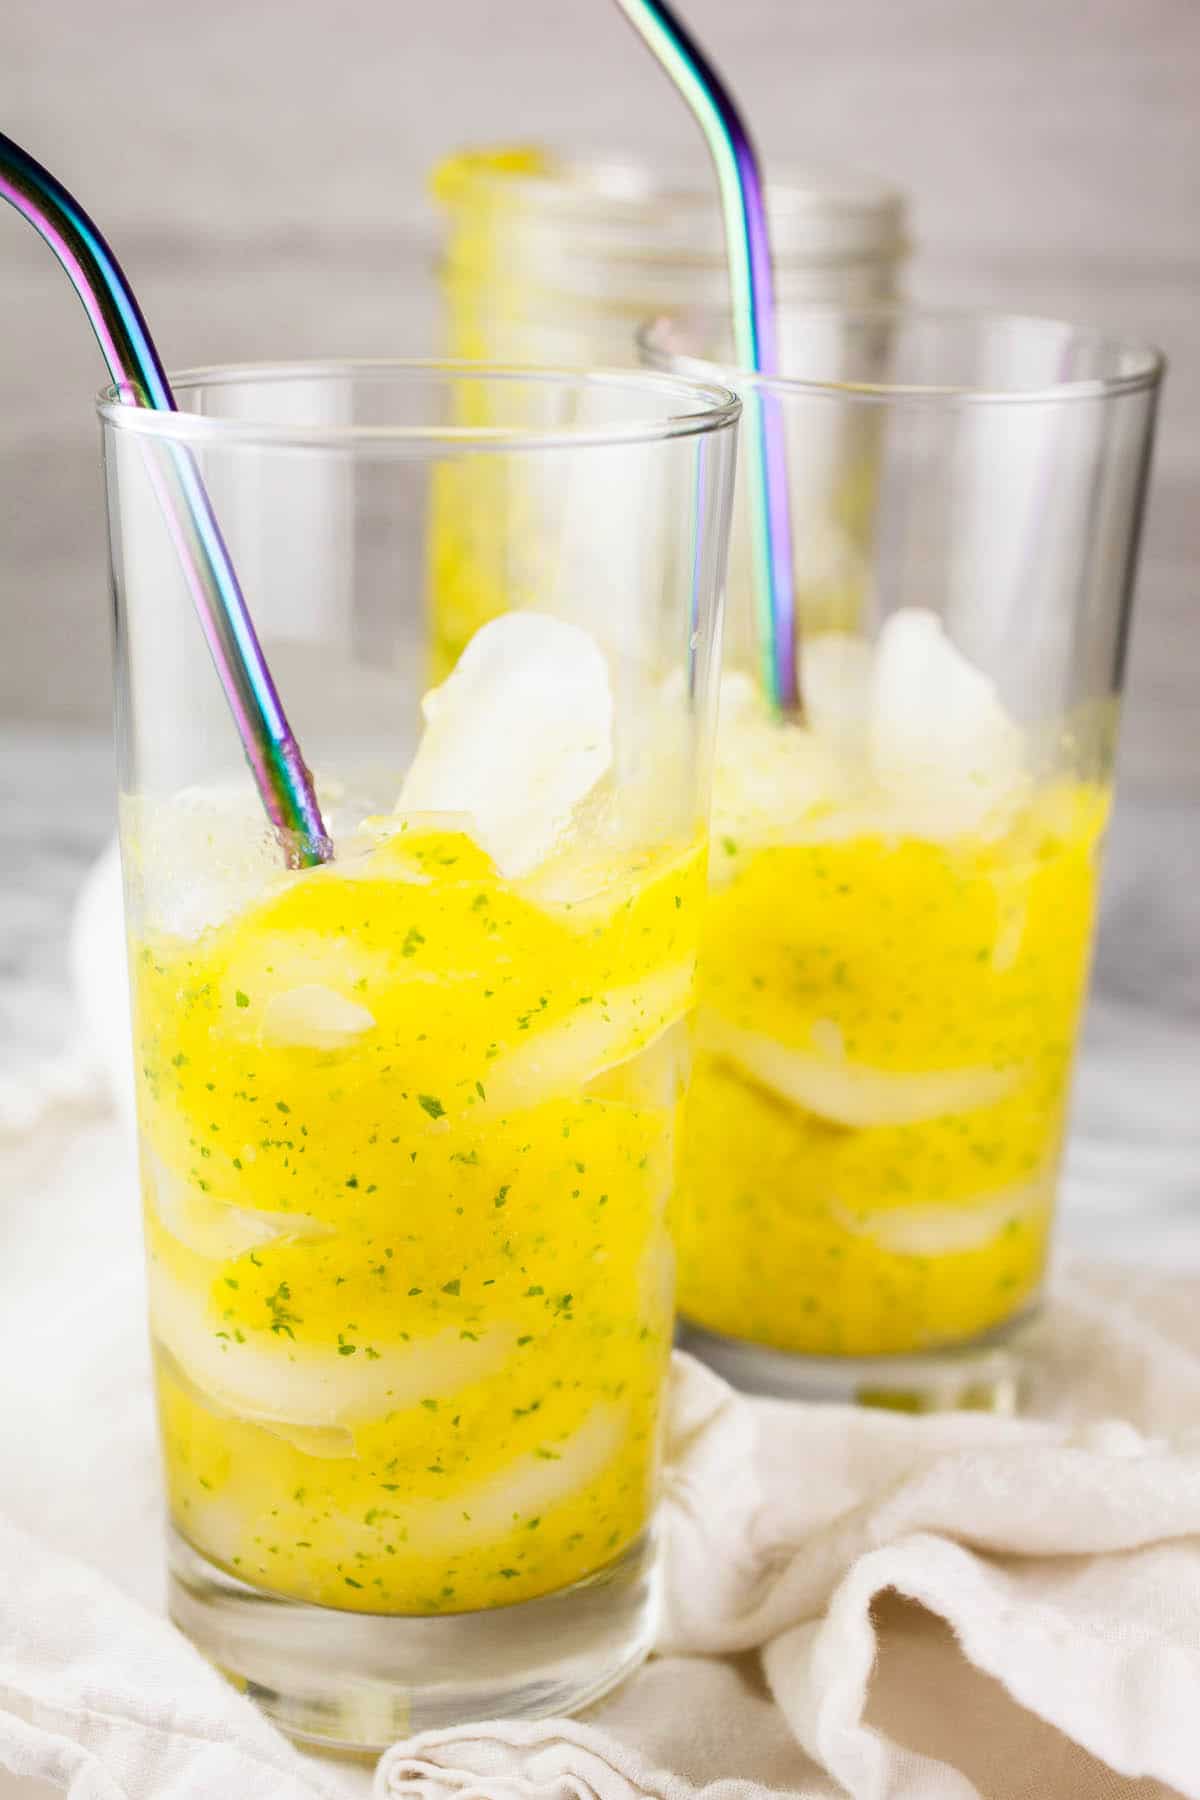 Mango puree in tall glasses with ice cubes and straws.